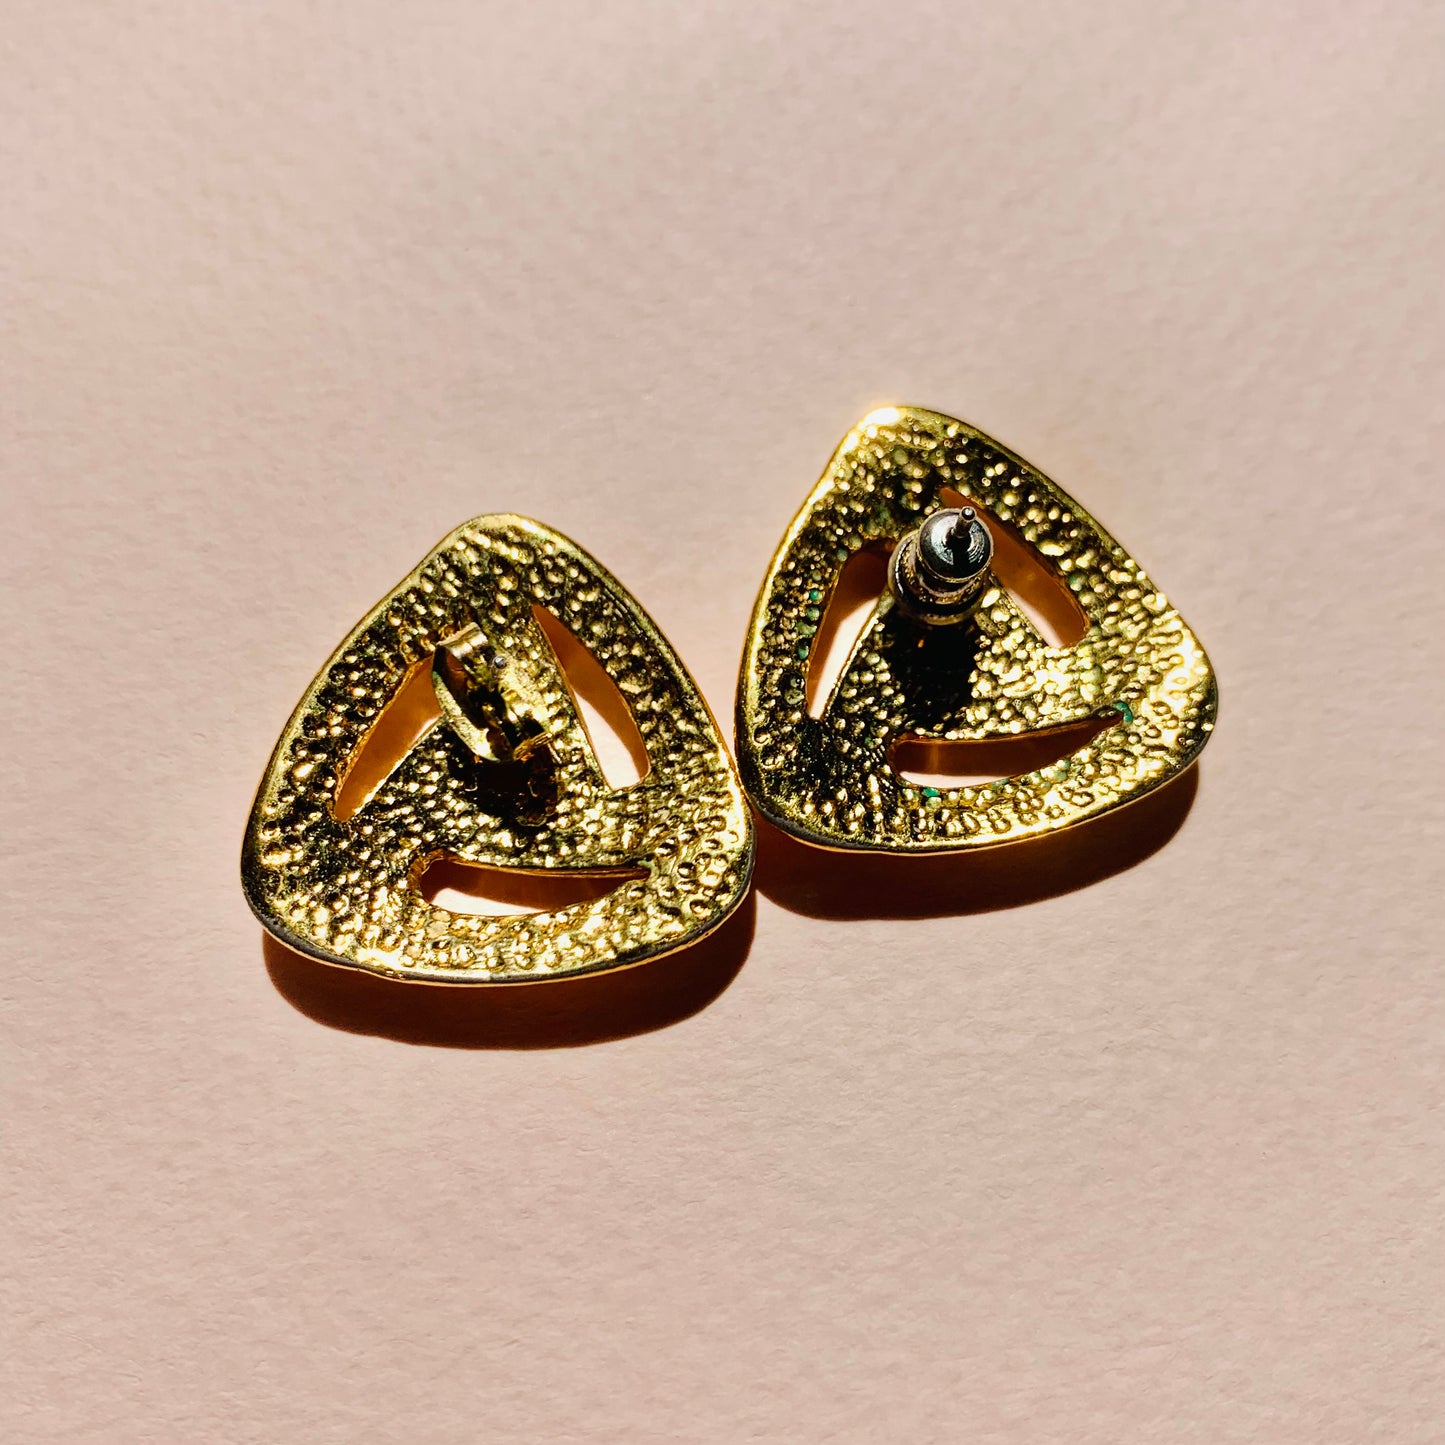 Rare 1970s triple gold plated earrings by Monet